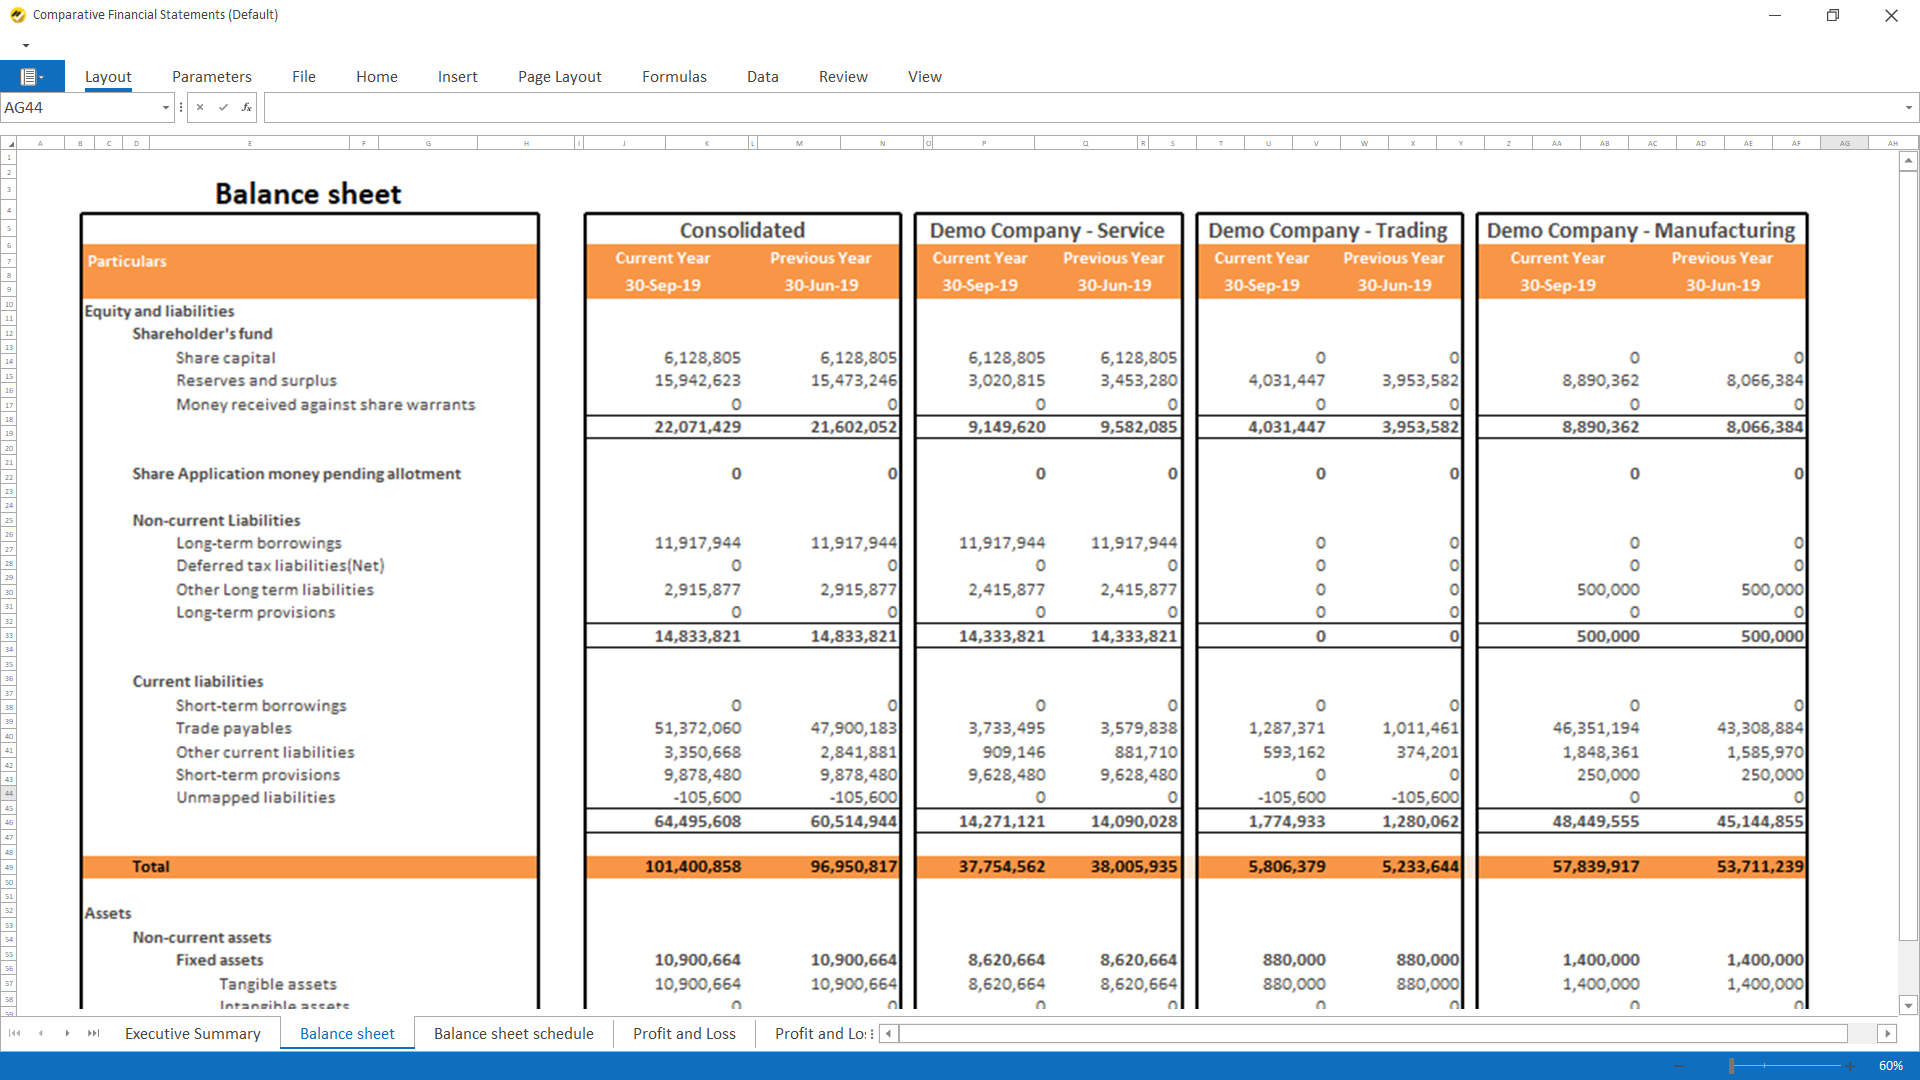 Formatted Financial Statements in Spreadsheet